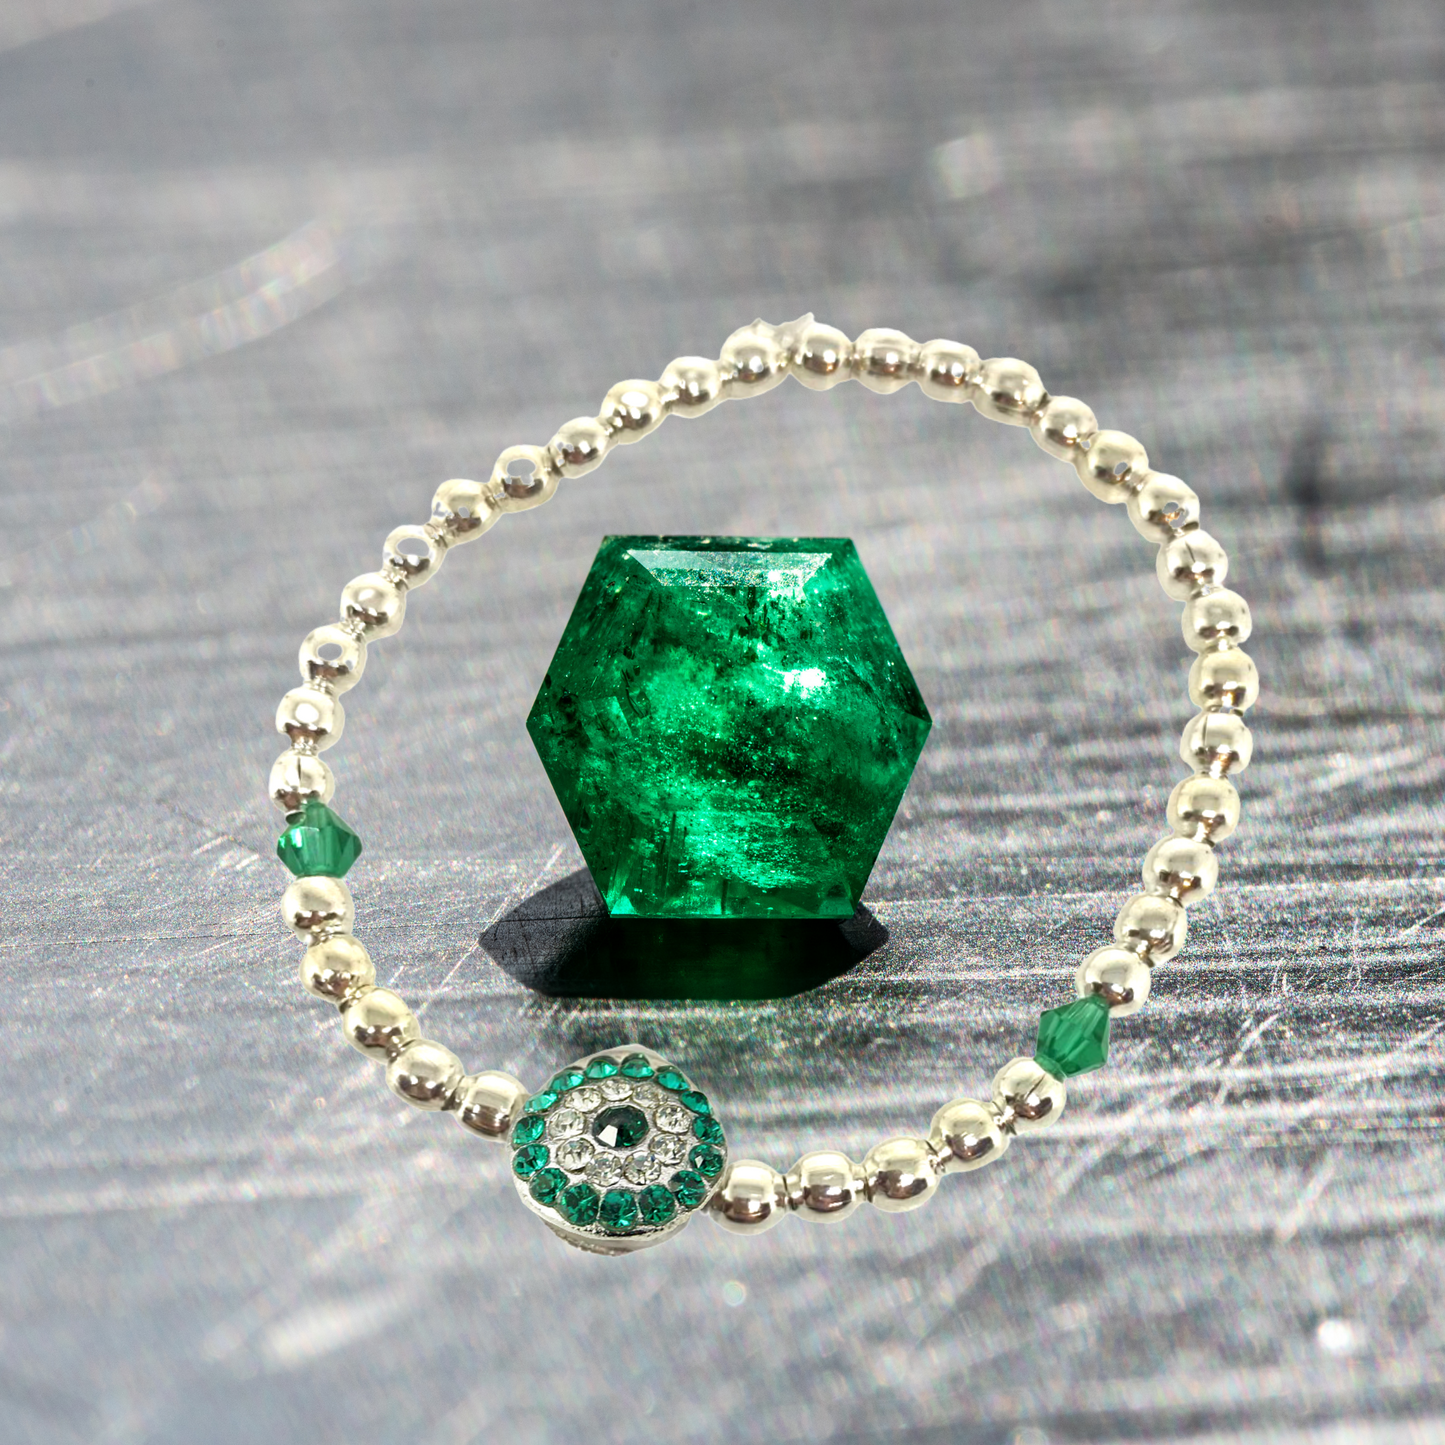 Emerald and Silver Beaded Stretch Bracelet